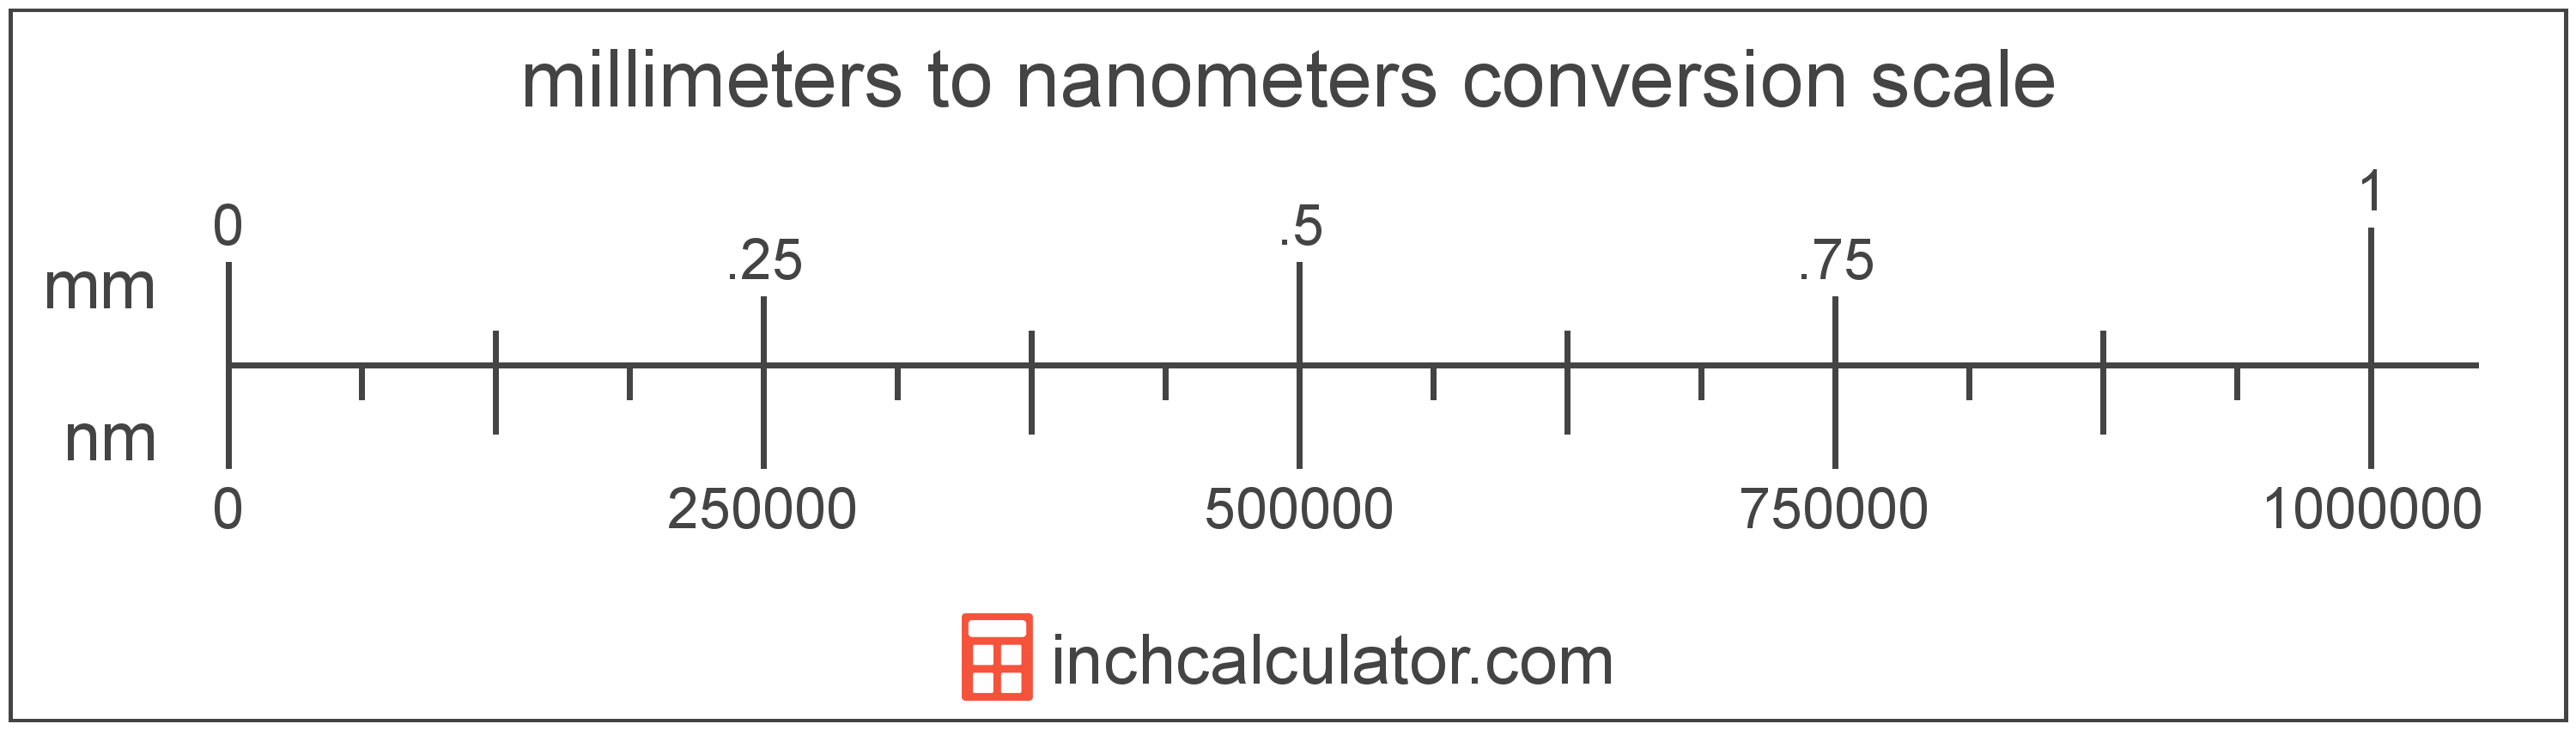 conversion scale showing nanometers and equivalent millimeters length values